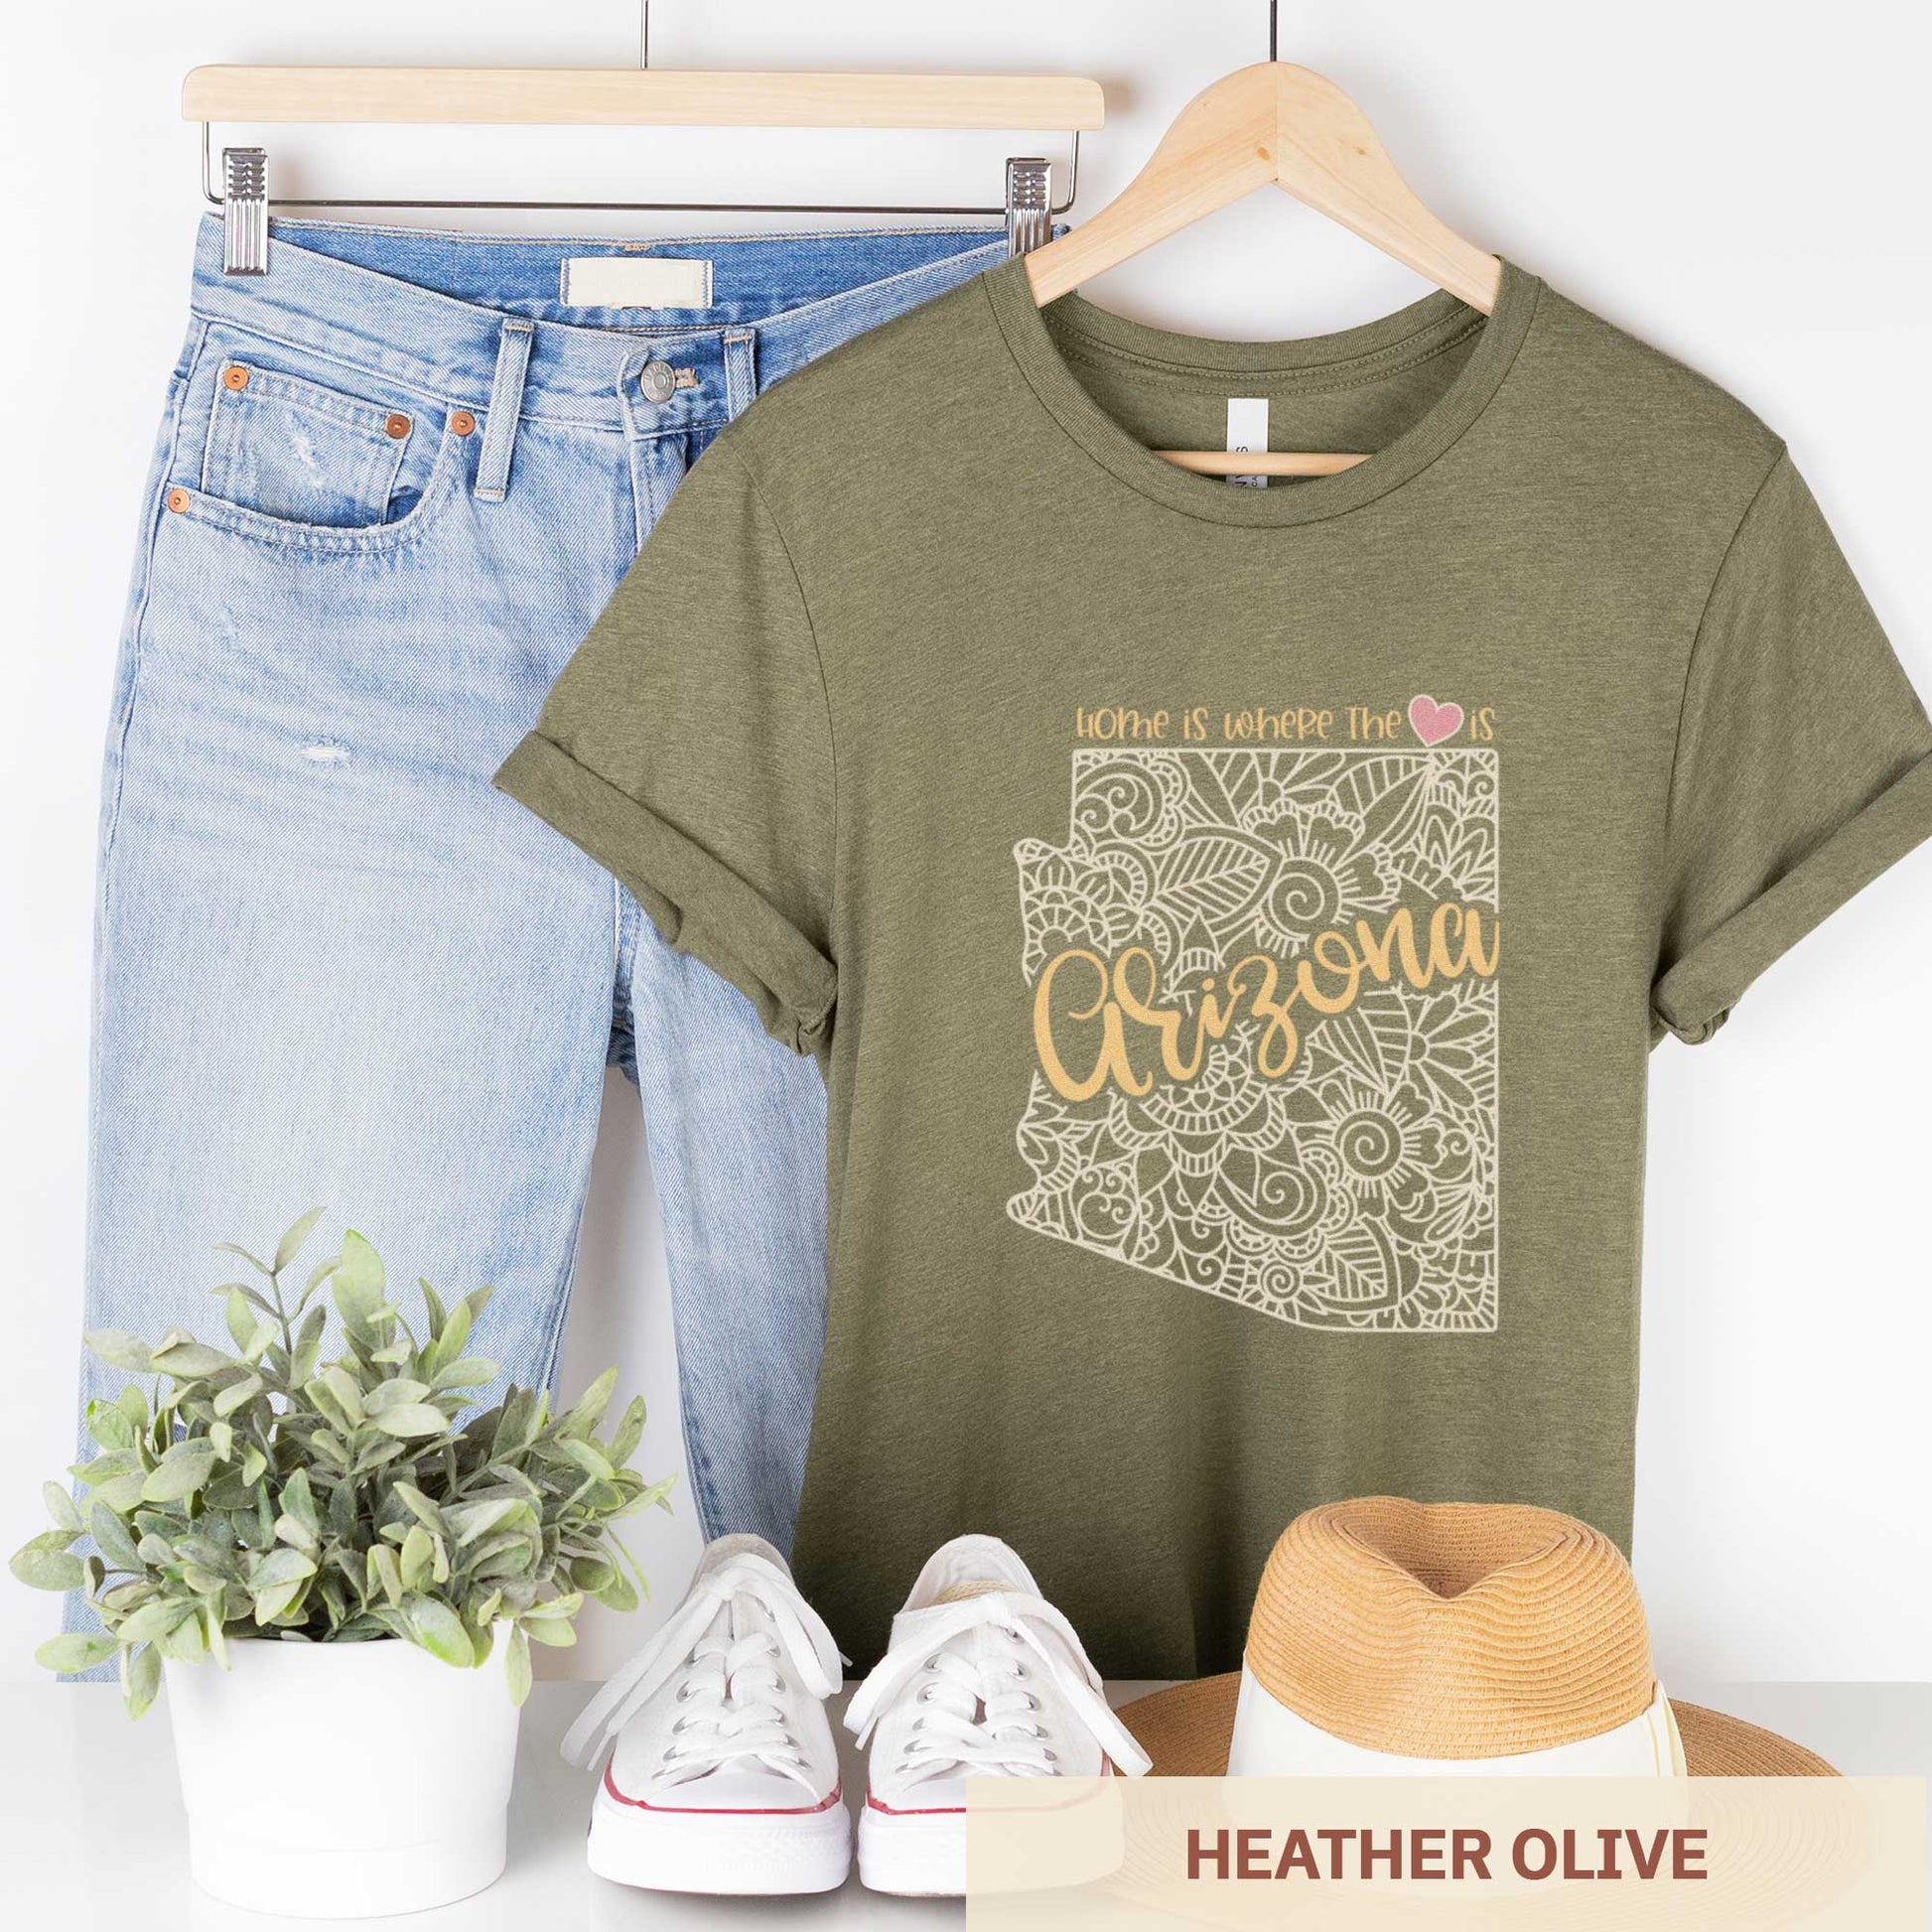 A hanging heather olive Bella Canvas t-shirt featuring a mandala in the shape of Arizona with the words home is where the heart is.